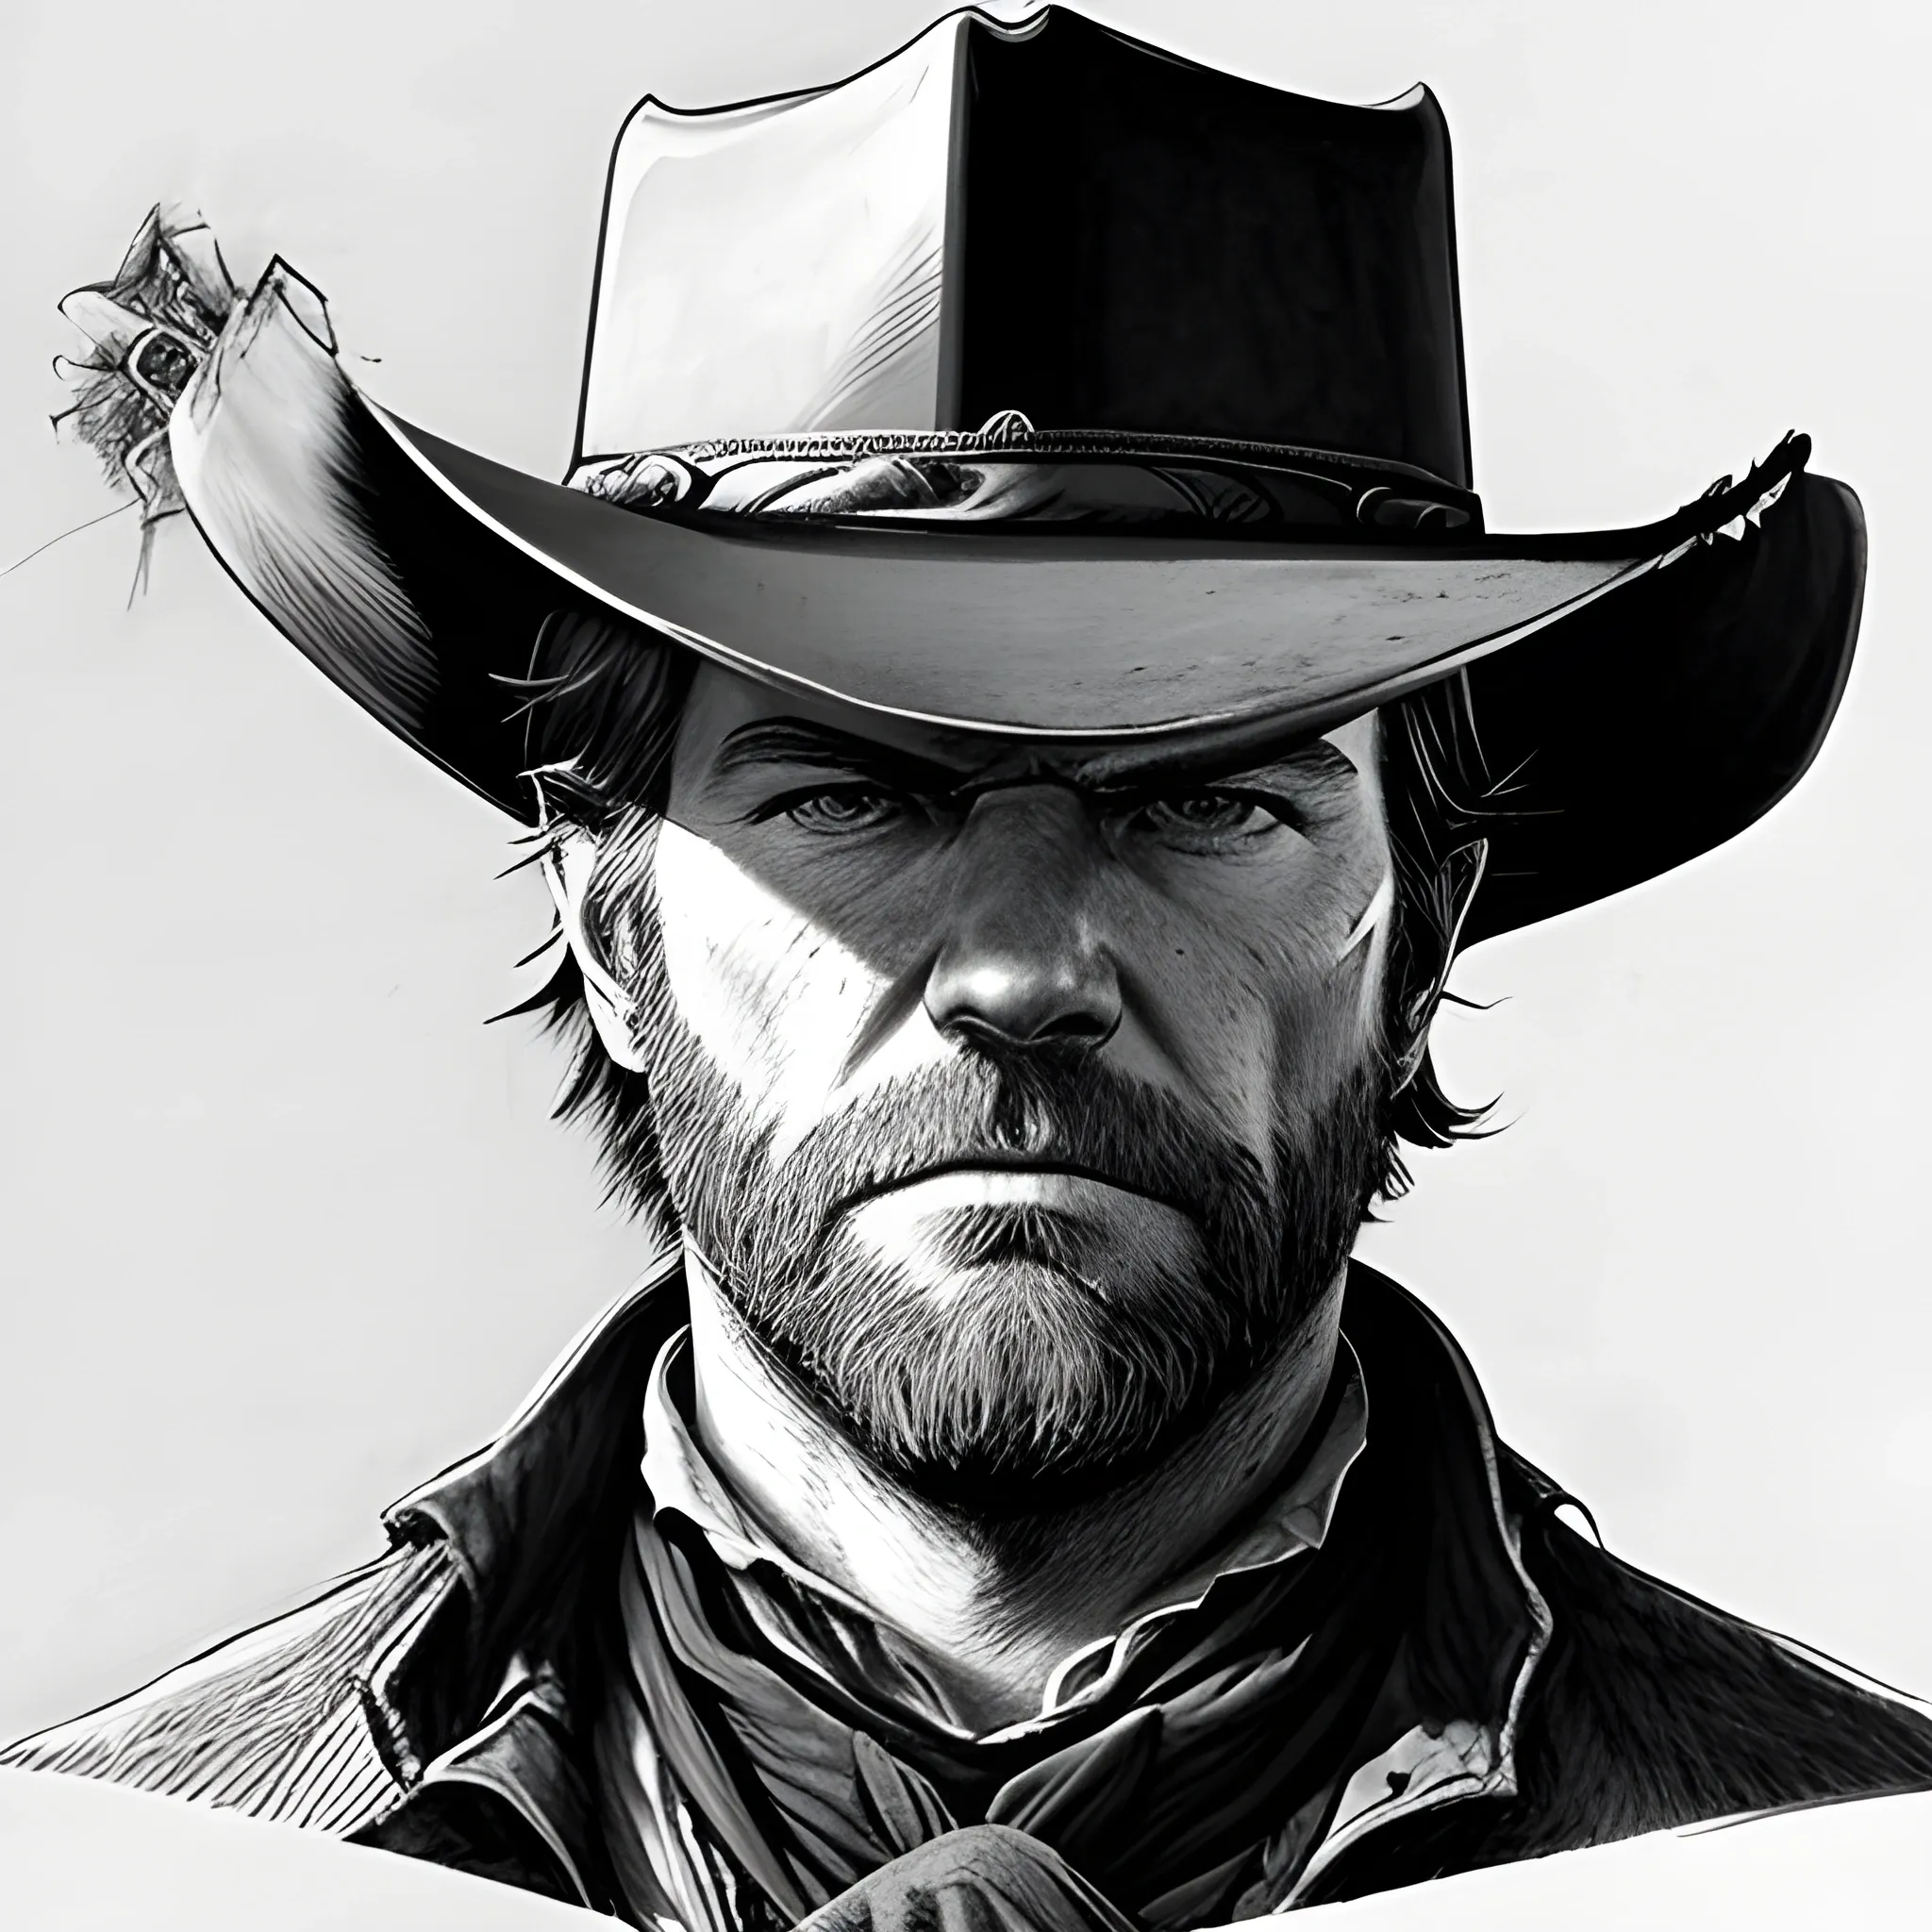 arthur morgan fromred dead redemption, Stable Diffusion